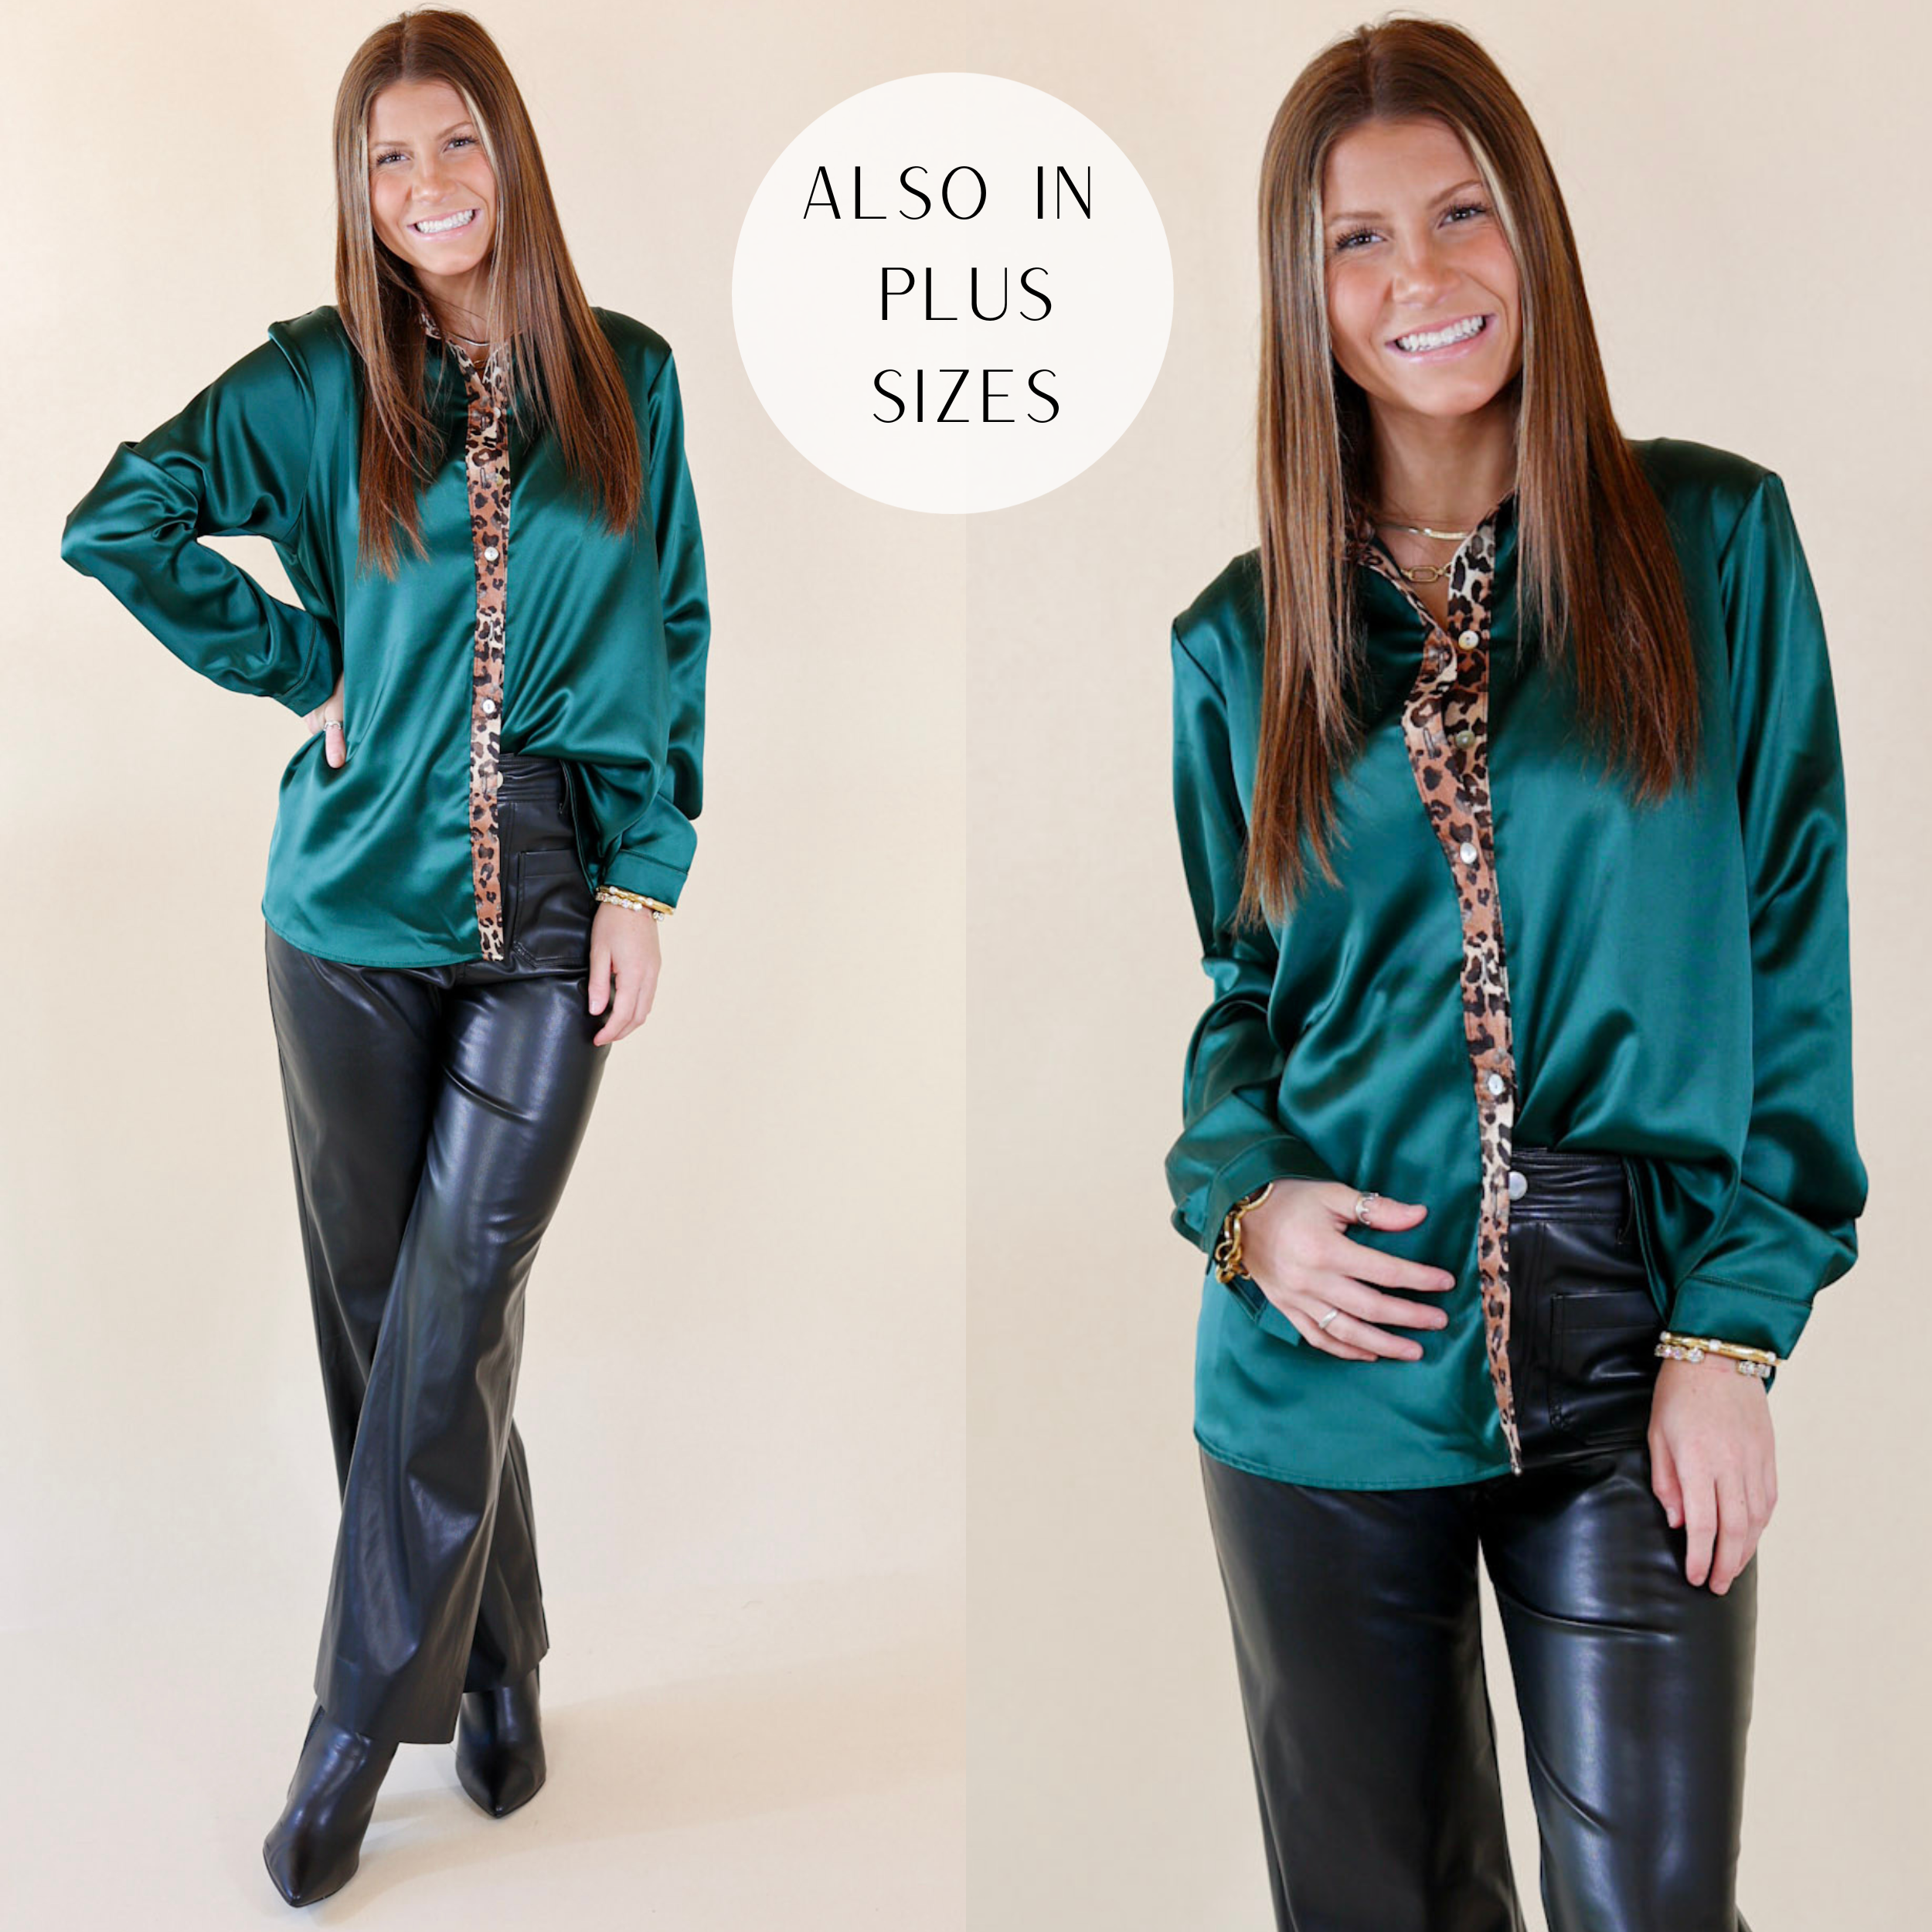 Model is wearing a dark green satin button up top with leopard trim. Model has it paired with faux leather pants, black booties, and gold jewelry.